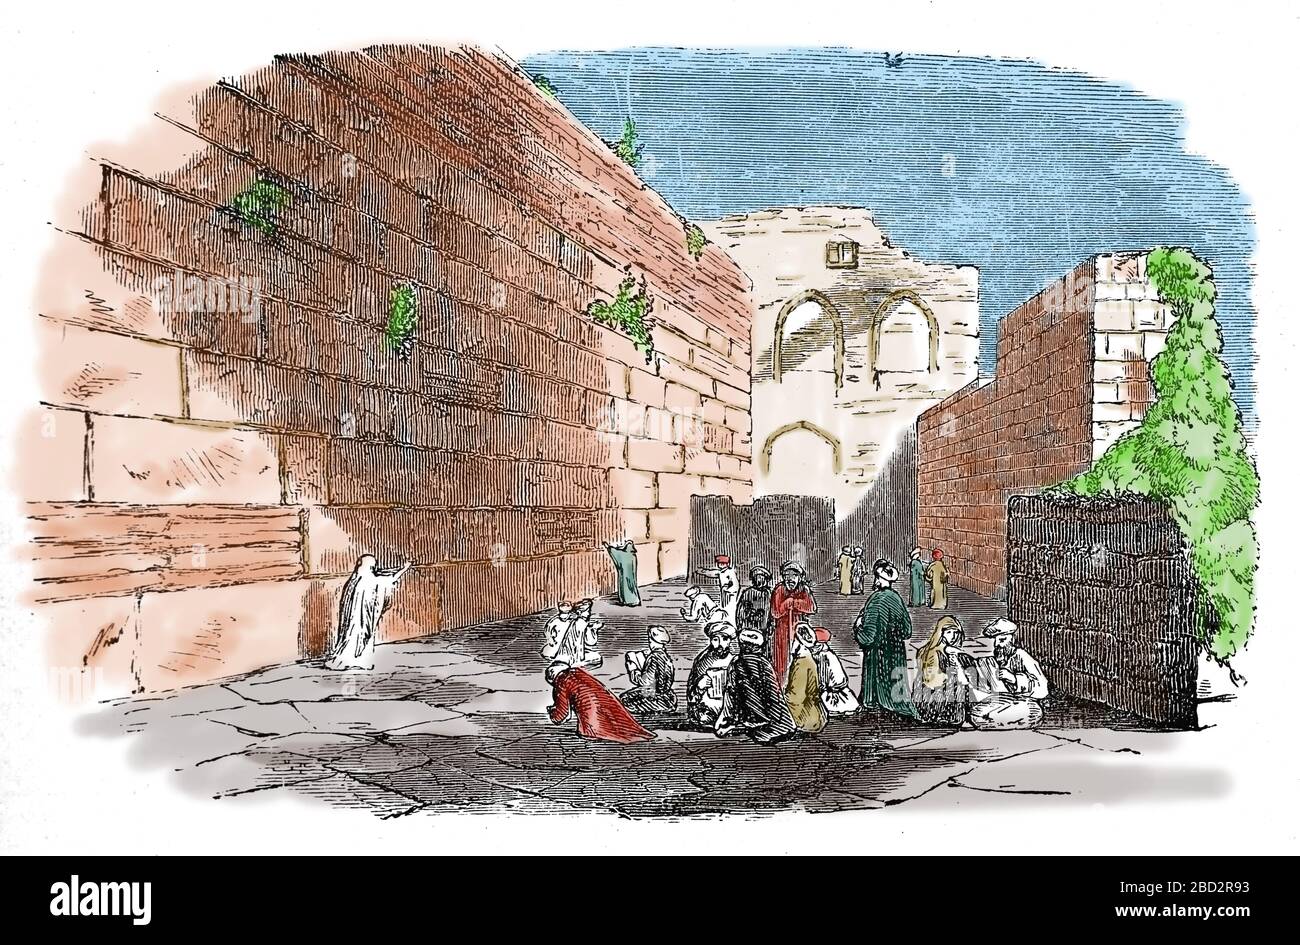 Israel. City of Jerusalem. Western Wall (small segment of old Temple). Engraving, 19th century. Stock Photo